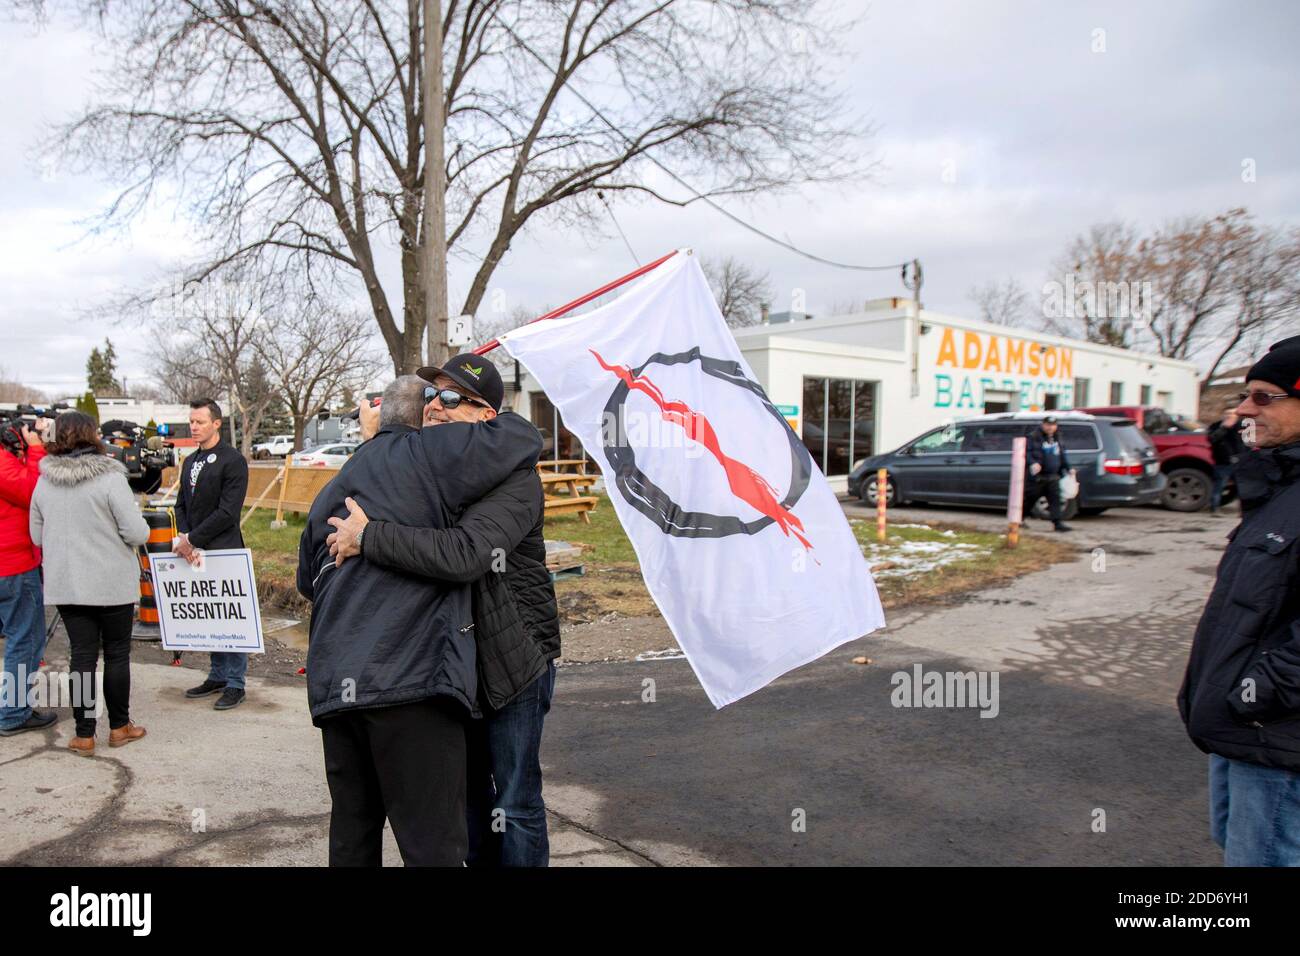 Anti-lockdown protesters hug outside Adamson Barbecue, which opened for indoor dining despite a reintroduction of coronavirus disease (COVID-19) restrictions in the Etobicoke suburb of Toronto, Ontario, Canada November 24, 2020.  REUTERS/Carlos Osorio Stock Photo